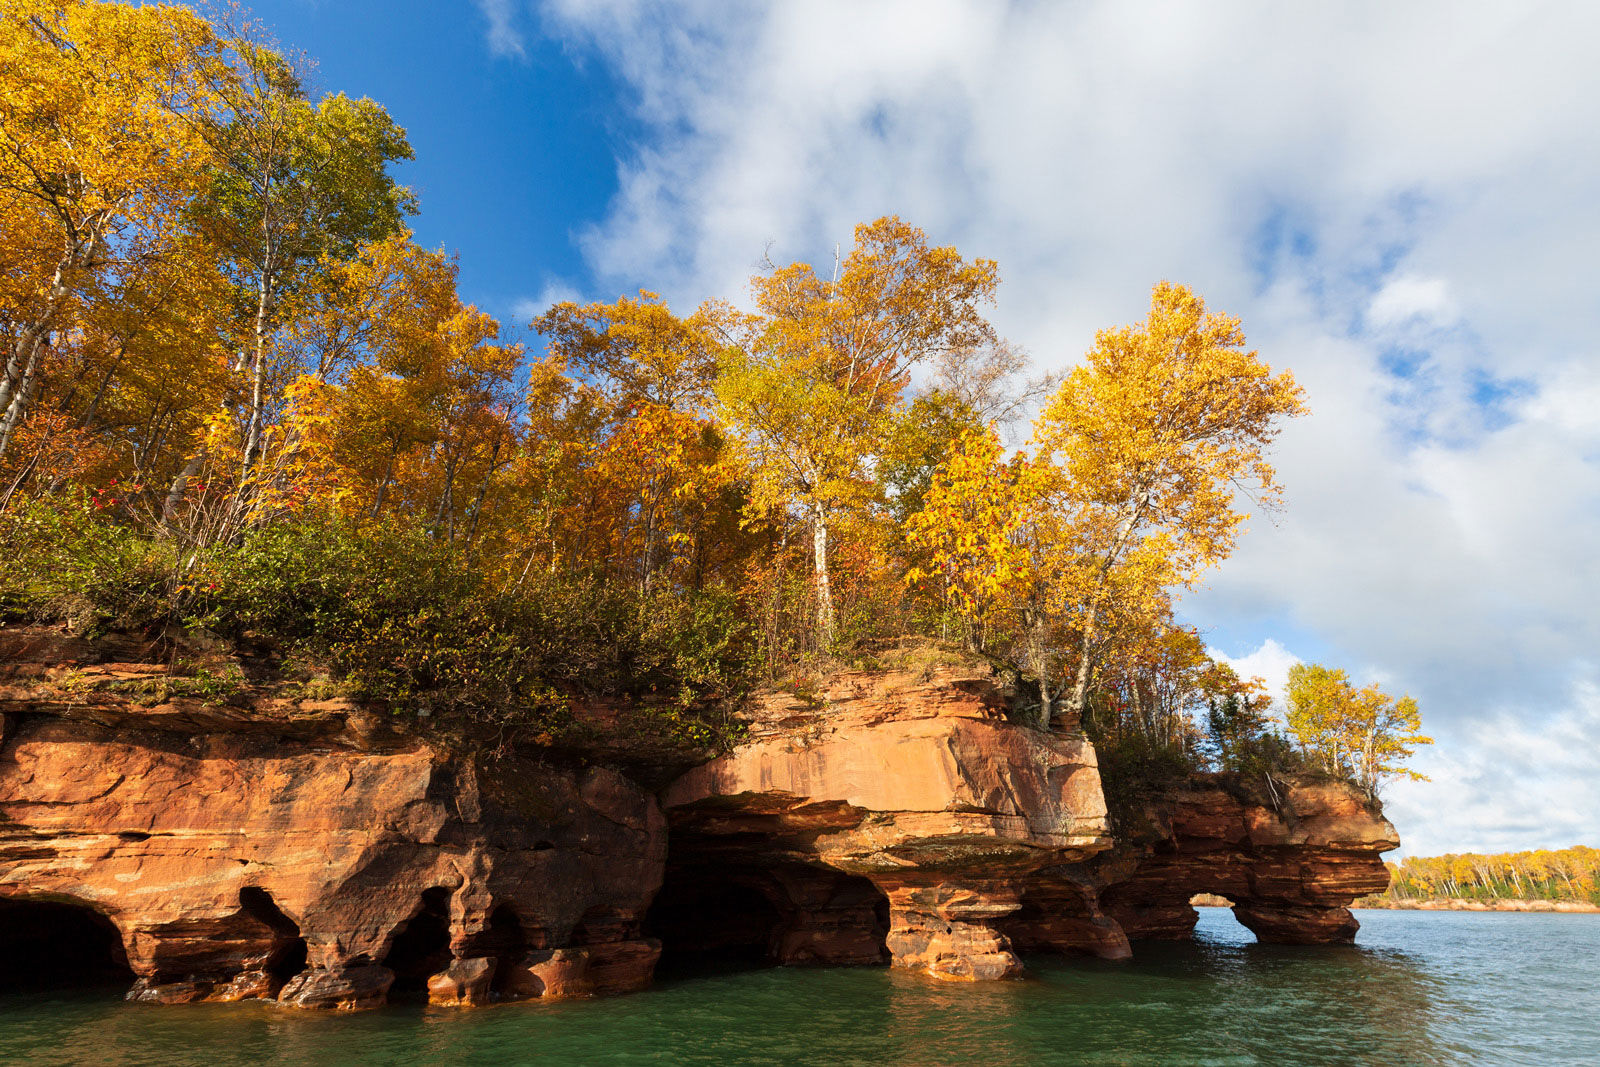 Peak fall colors at the swallow point sea caves on Sand Island in the Apostle Islands.